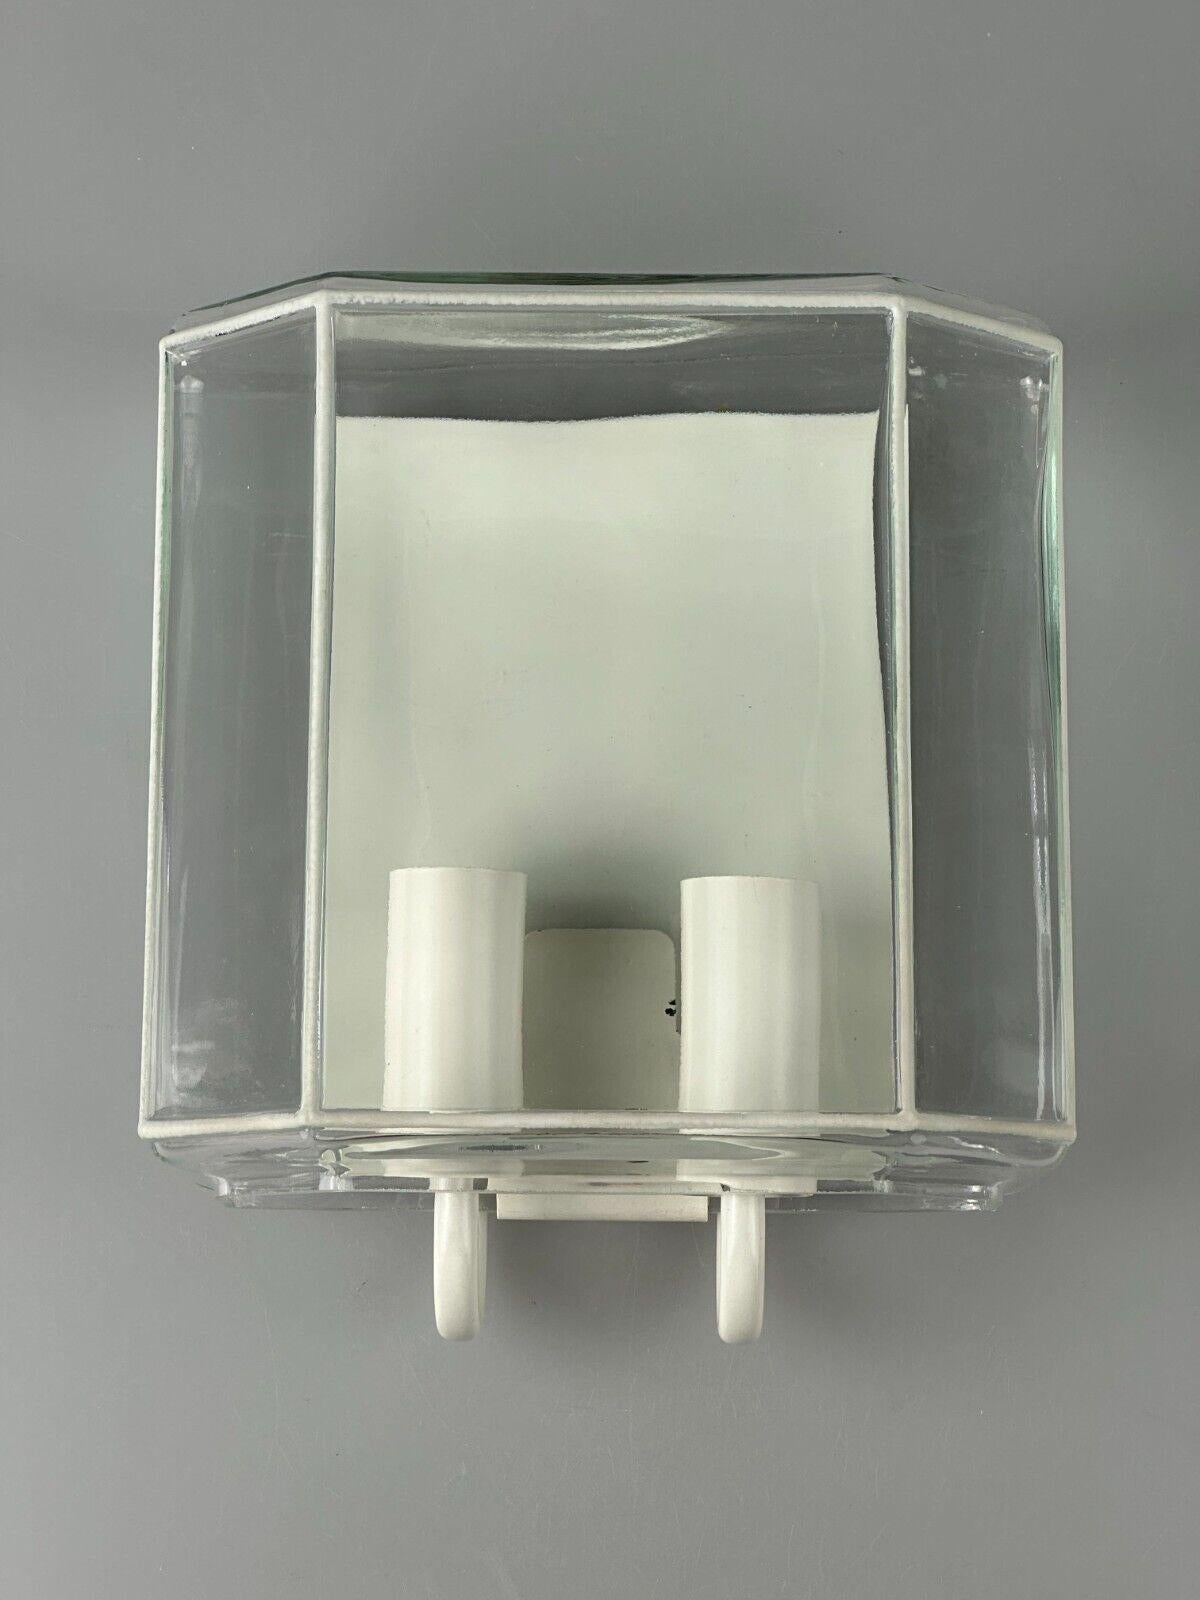 60s 70s wall lamp Glashütte Limburg Germany Glass & Metal Age Design In Good Condition For Sale In Neuenkirchen, NI